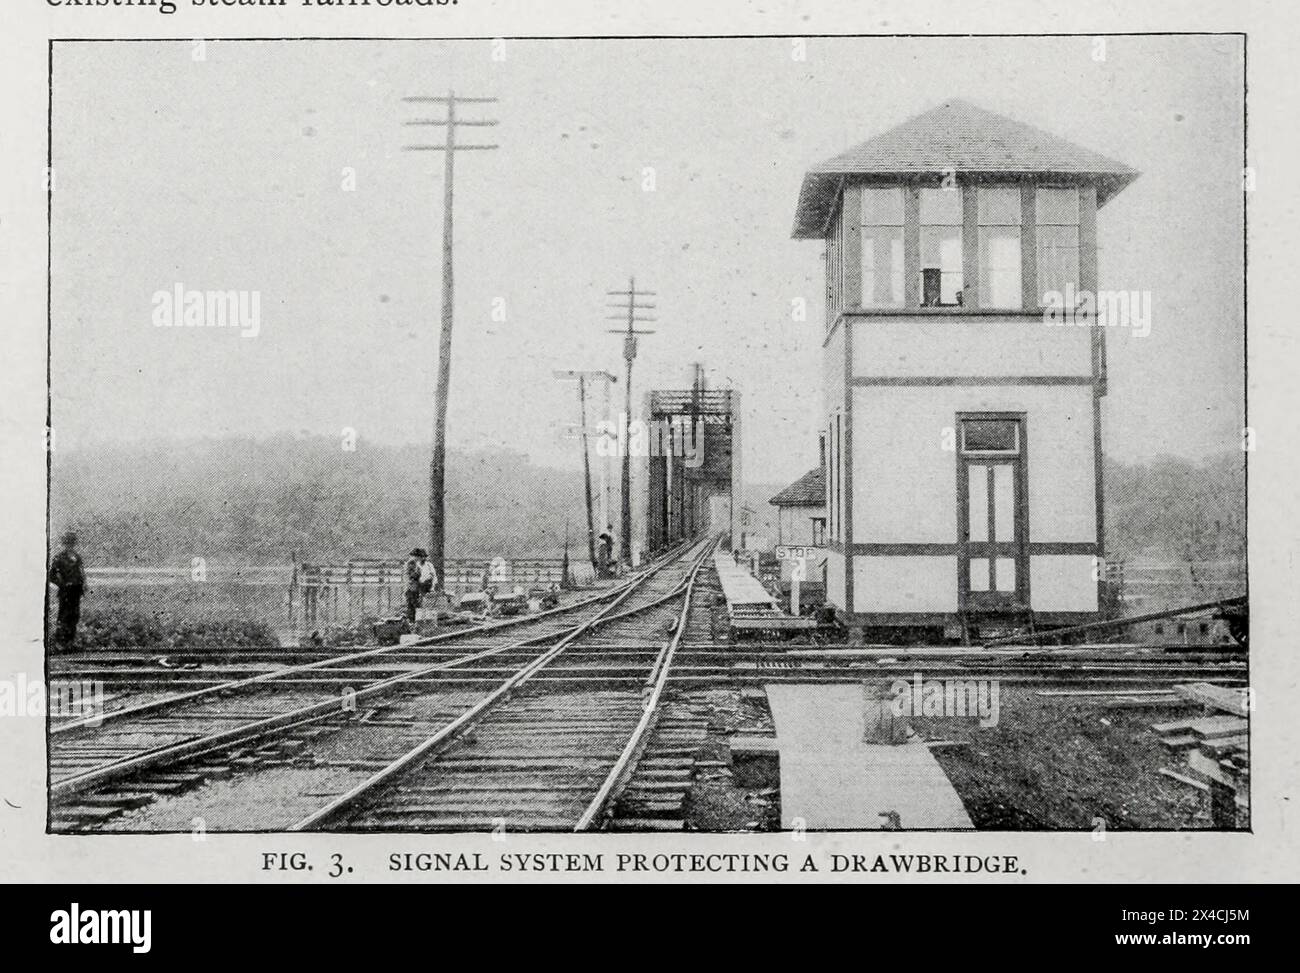 SIGNAL SYSTEM PROTECTING A DRAWBRIDGE. from the Article THE EVOLUTION OF SAFETY IN RAILWAY TRAVEL. By Charles Hansel. from The Engineering Magazine Devoted to Industrial Progress Volume XVI October 1898 - March 1899 The Engineering Magazine Co Stock Photo